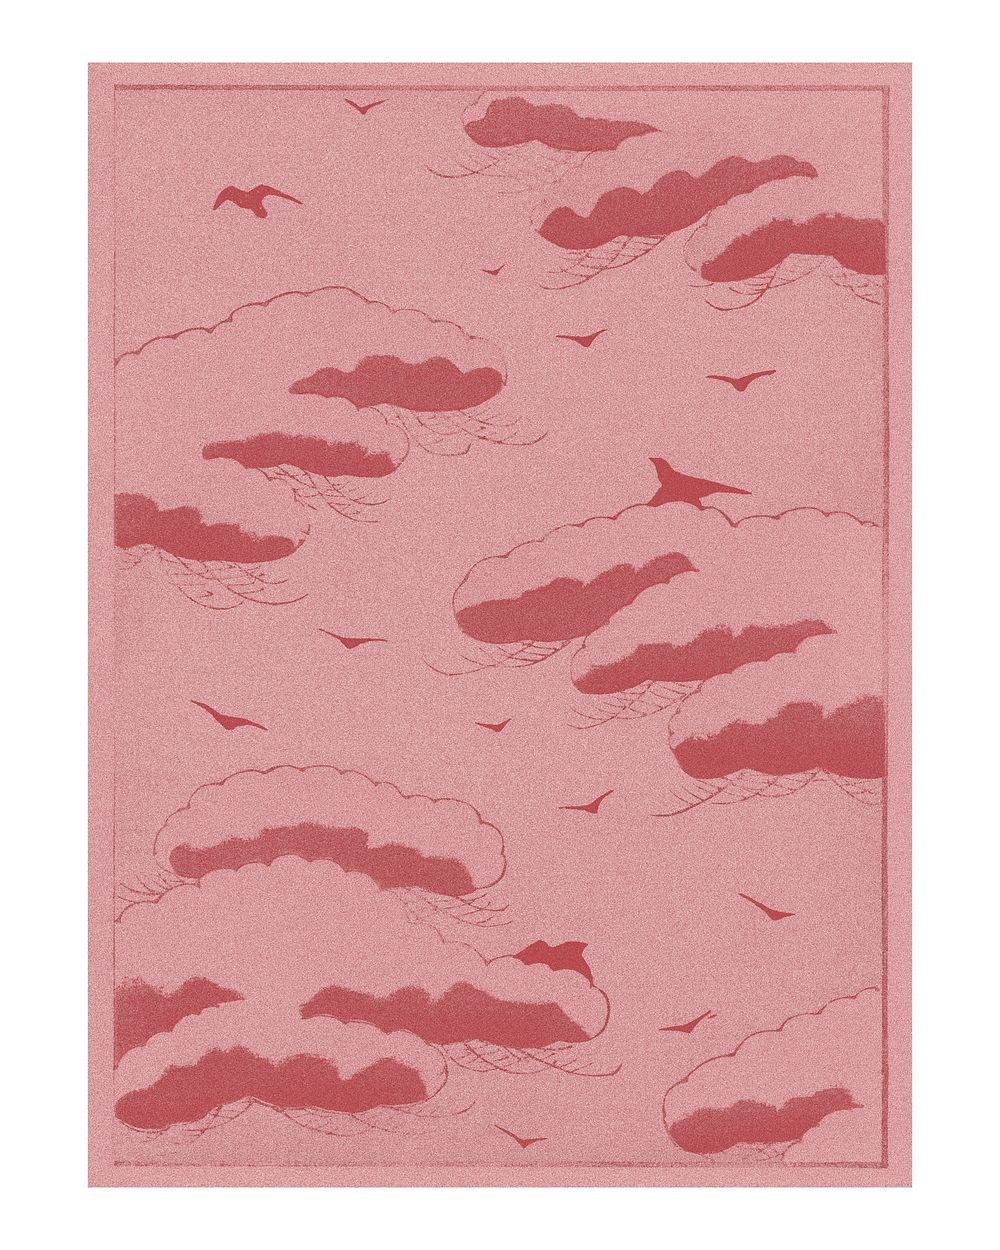 Pink cloudy sky illustration wall art print and poster. Remix from original painting